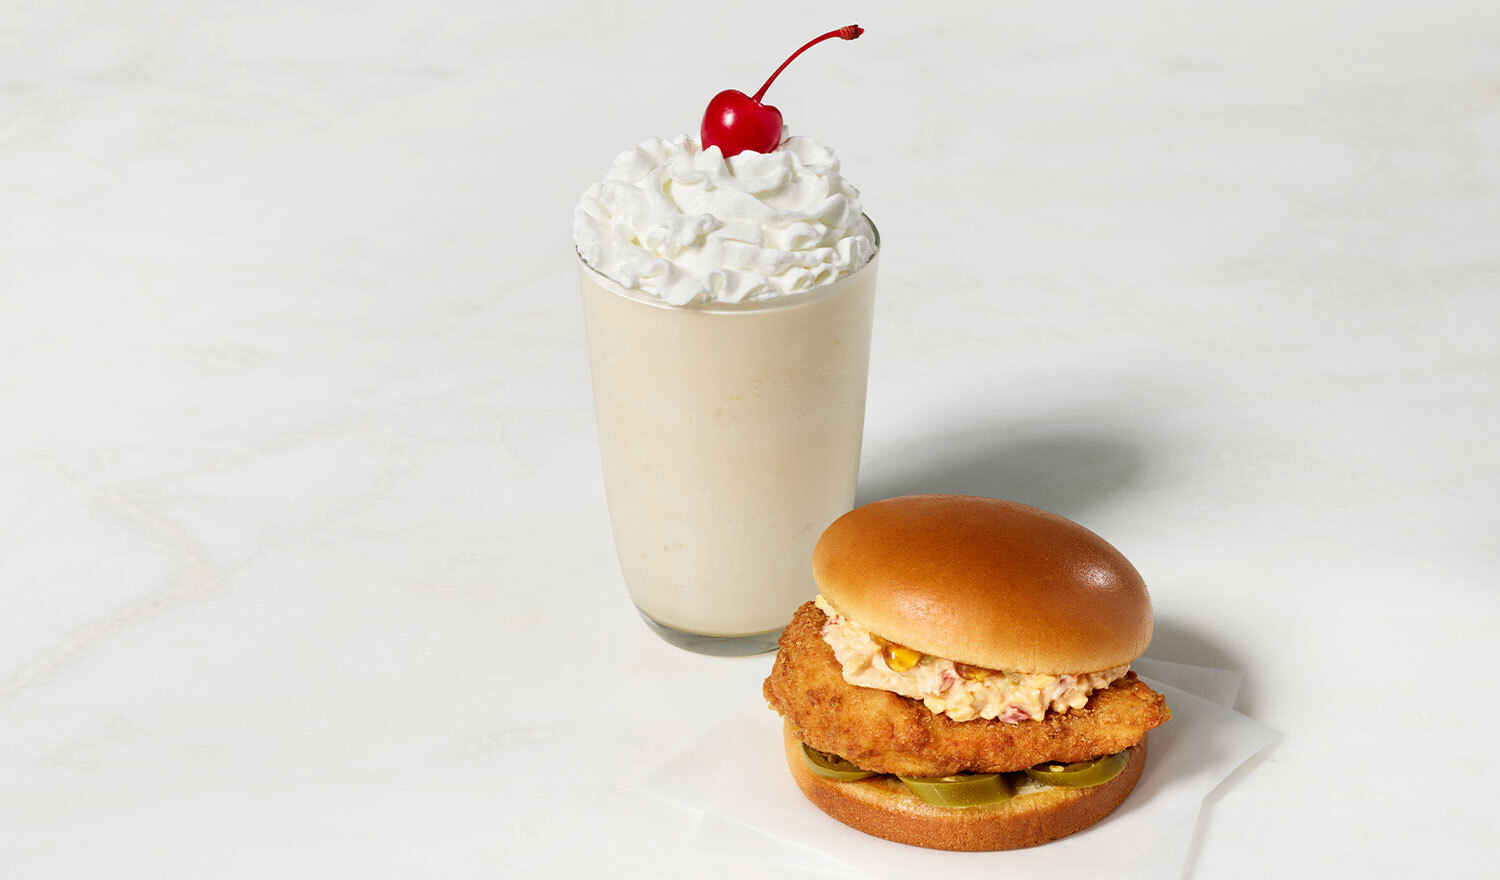 Chick-fil-A Introduces The Honey Pepper Pimento Chicken Sandwich